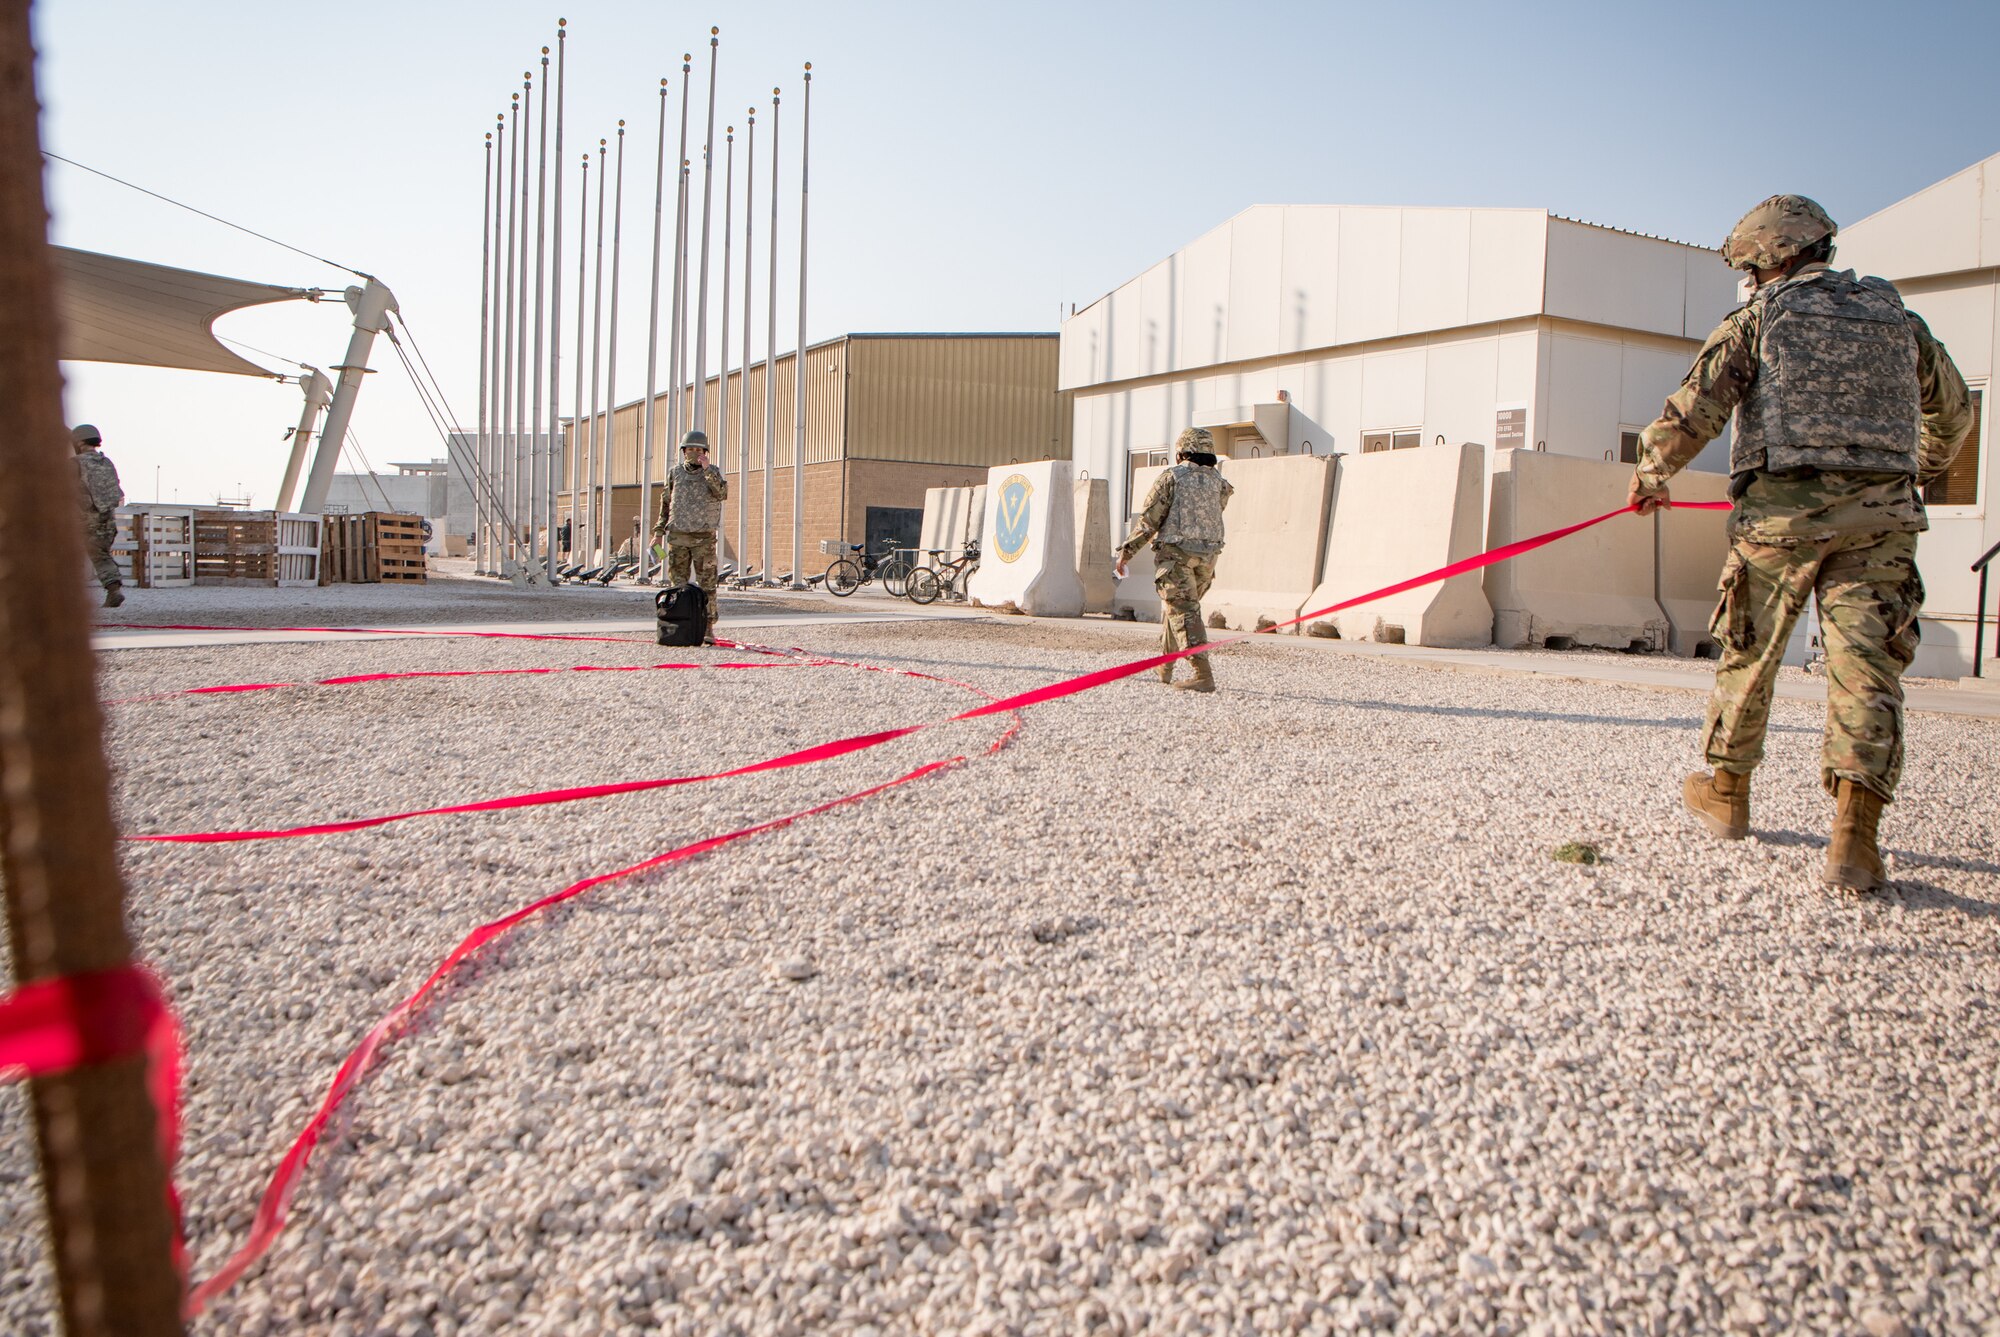 Airmen lay out red tape to mark a boundary